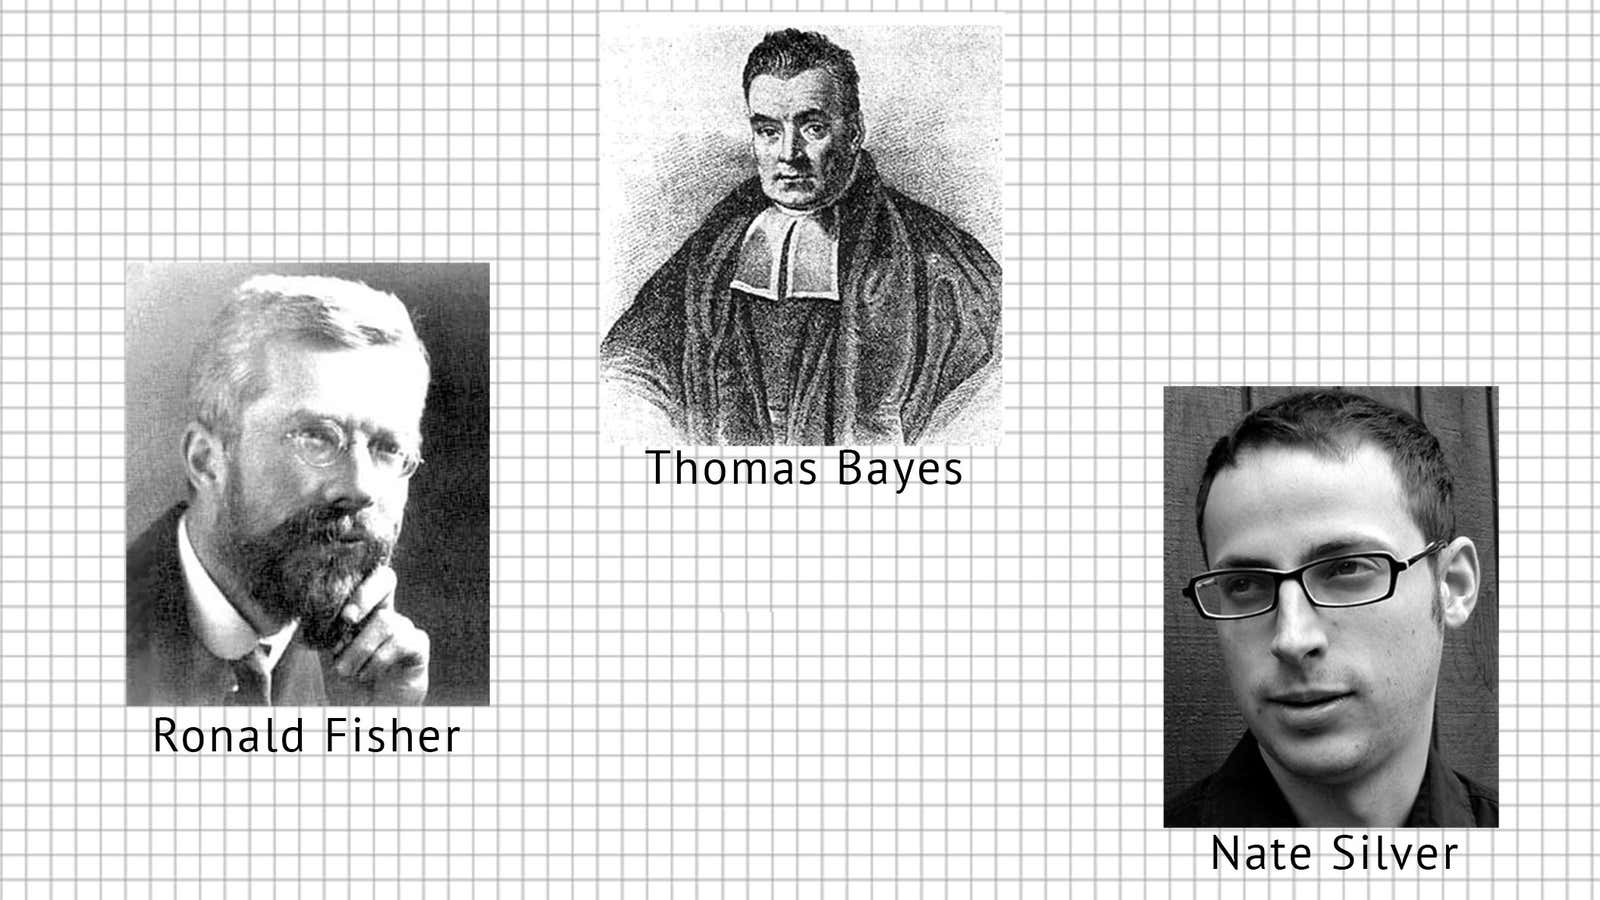 Silver rejects the teachings of Fisher for his predecessor Bayes’s methods.